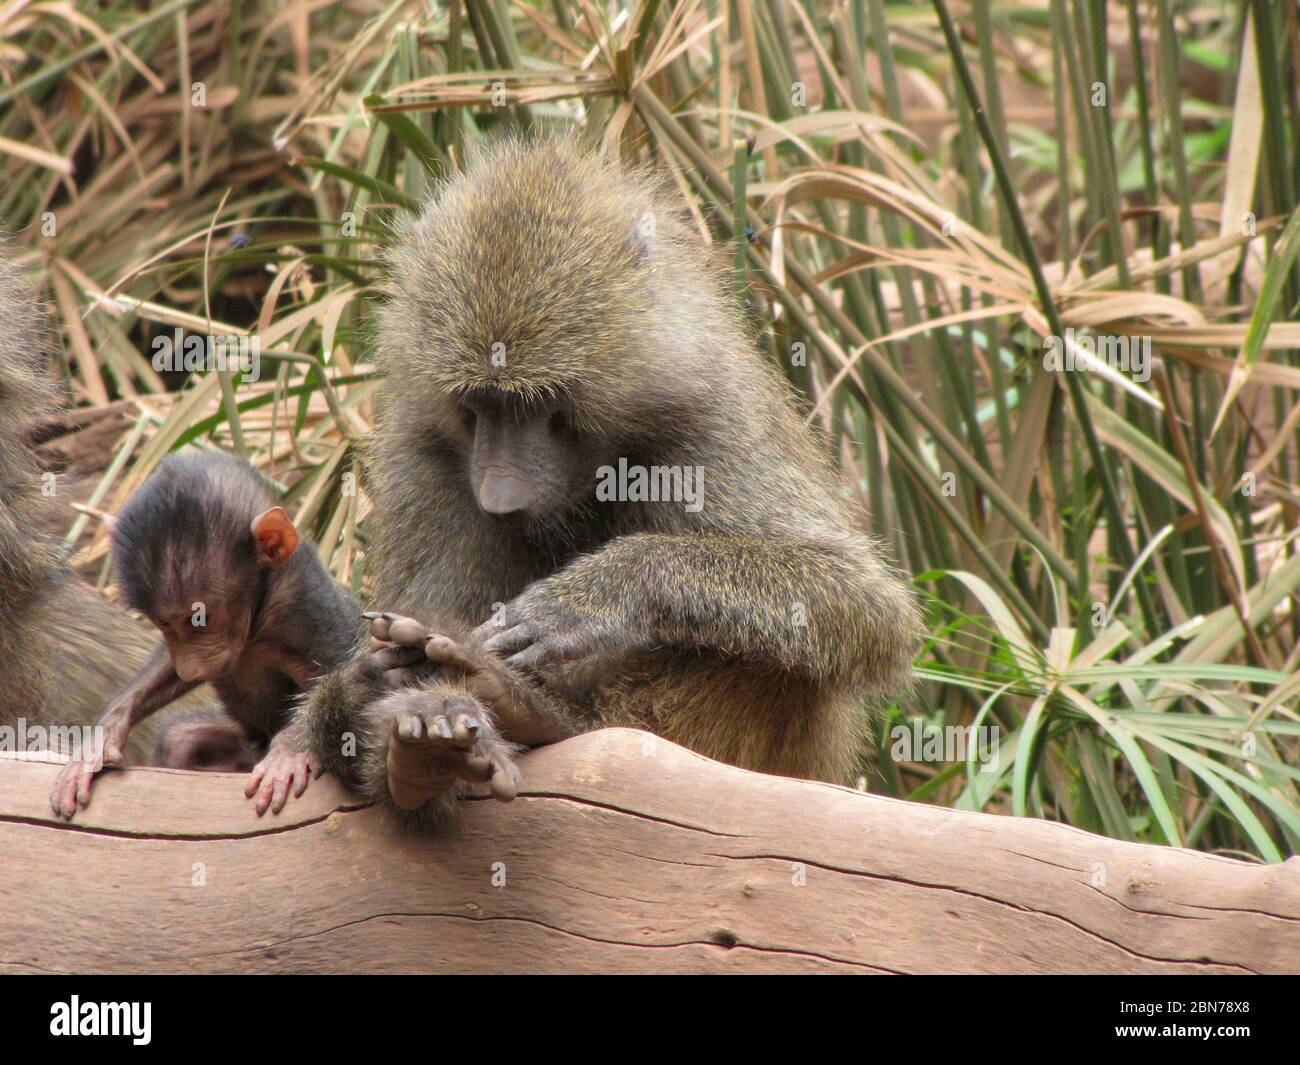 Olive Baboon (Papio anubis), also called the Anubis Baboon Mother interacting with young Photographed at Serengeti National Park, Tanzania Stock Photo